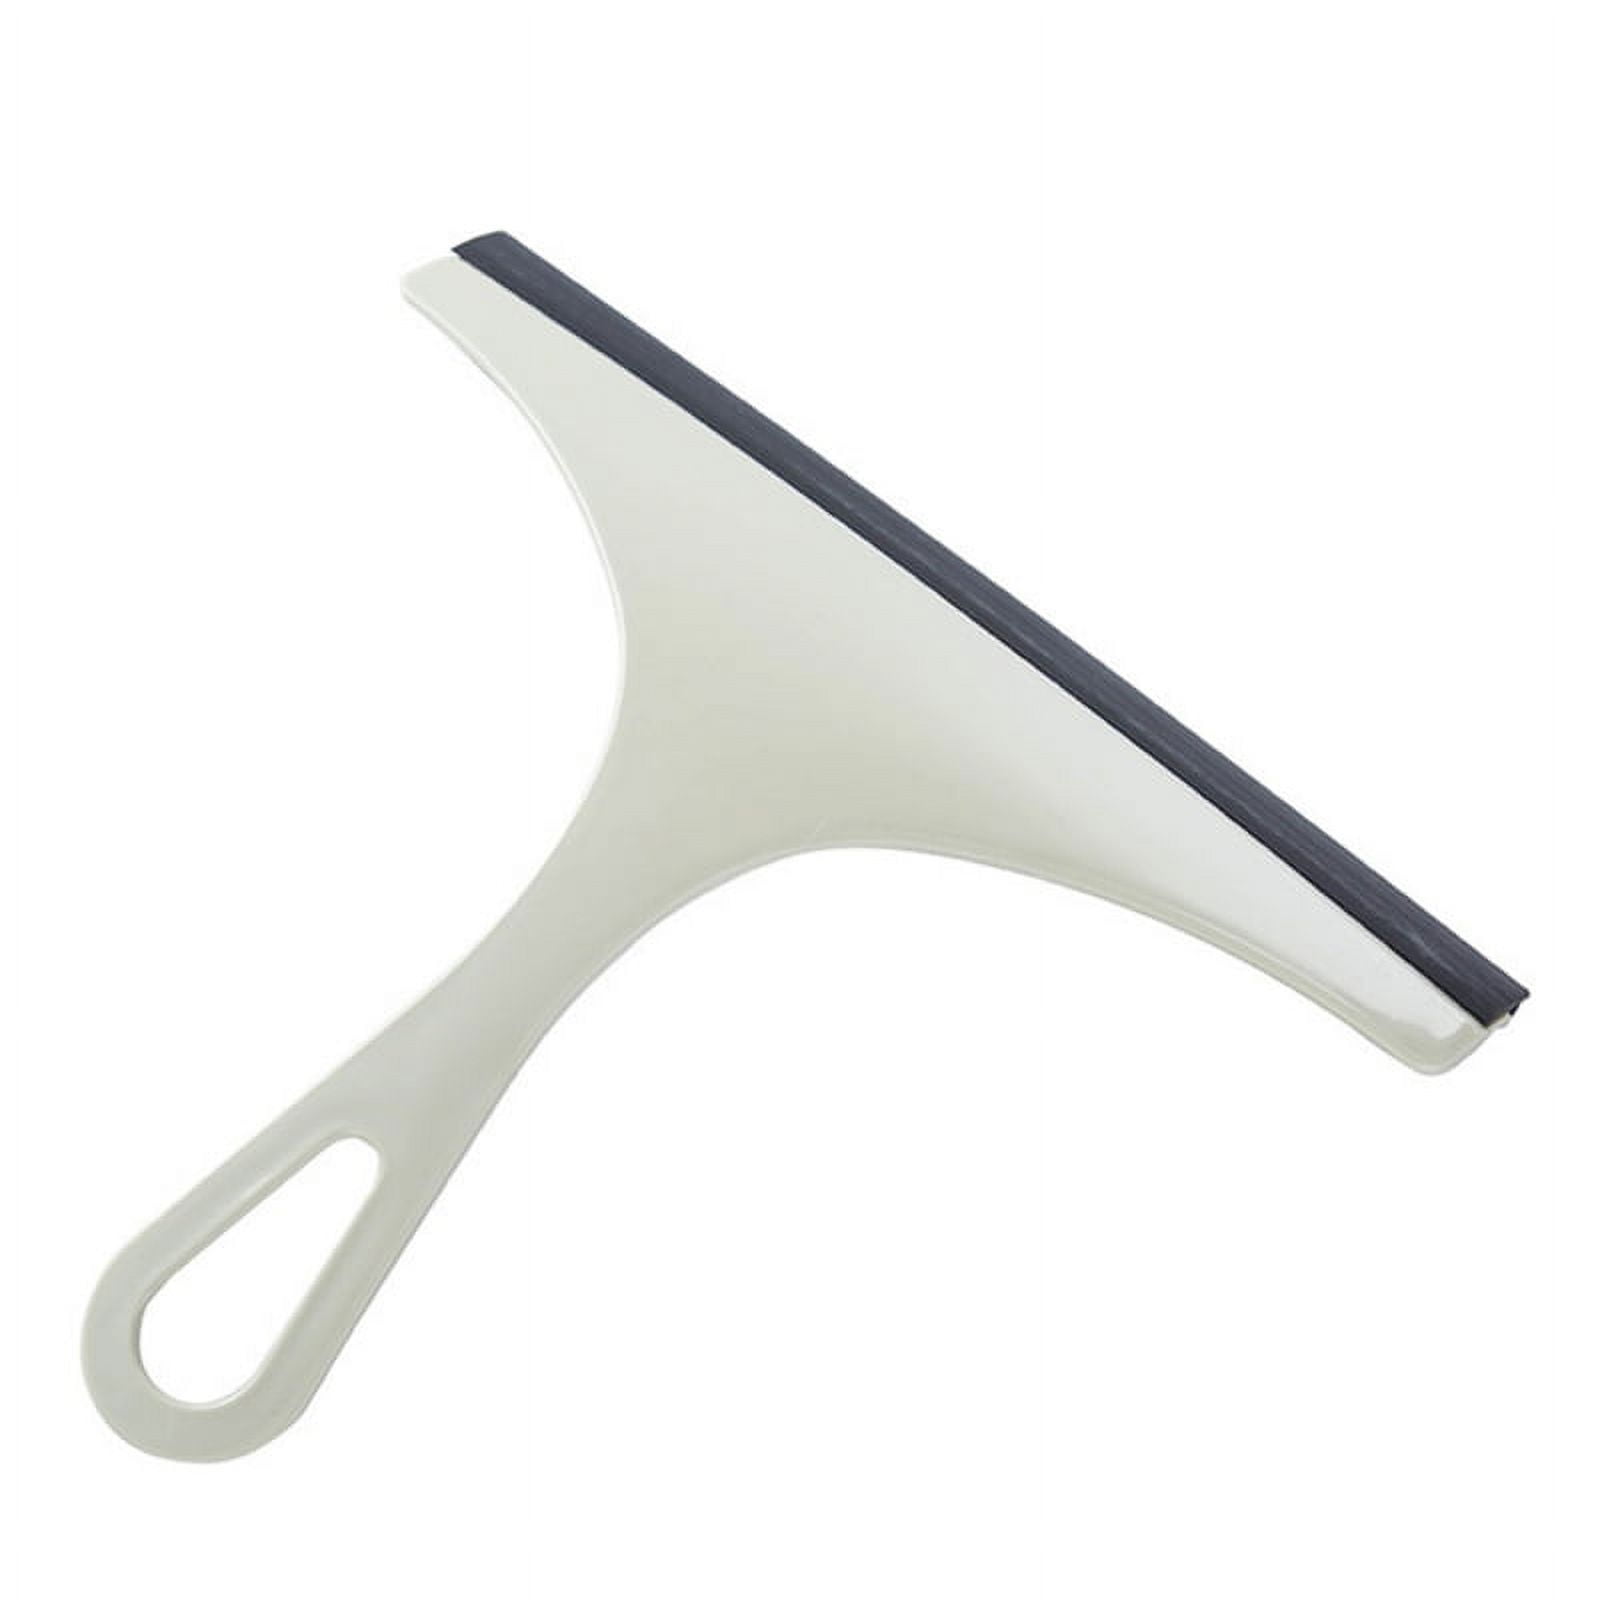 Hand Squeegee